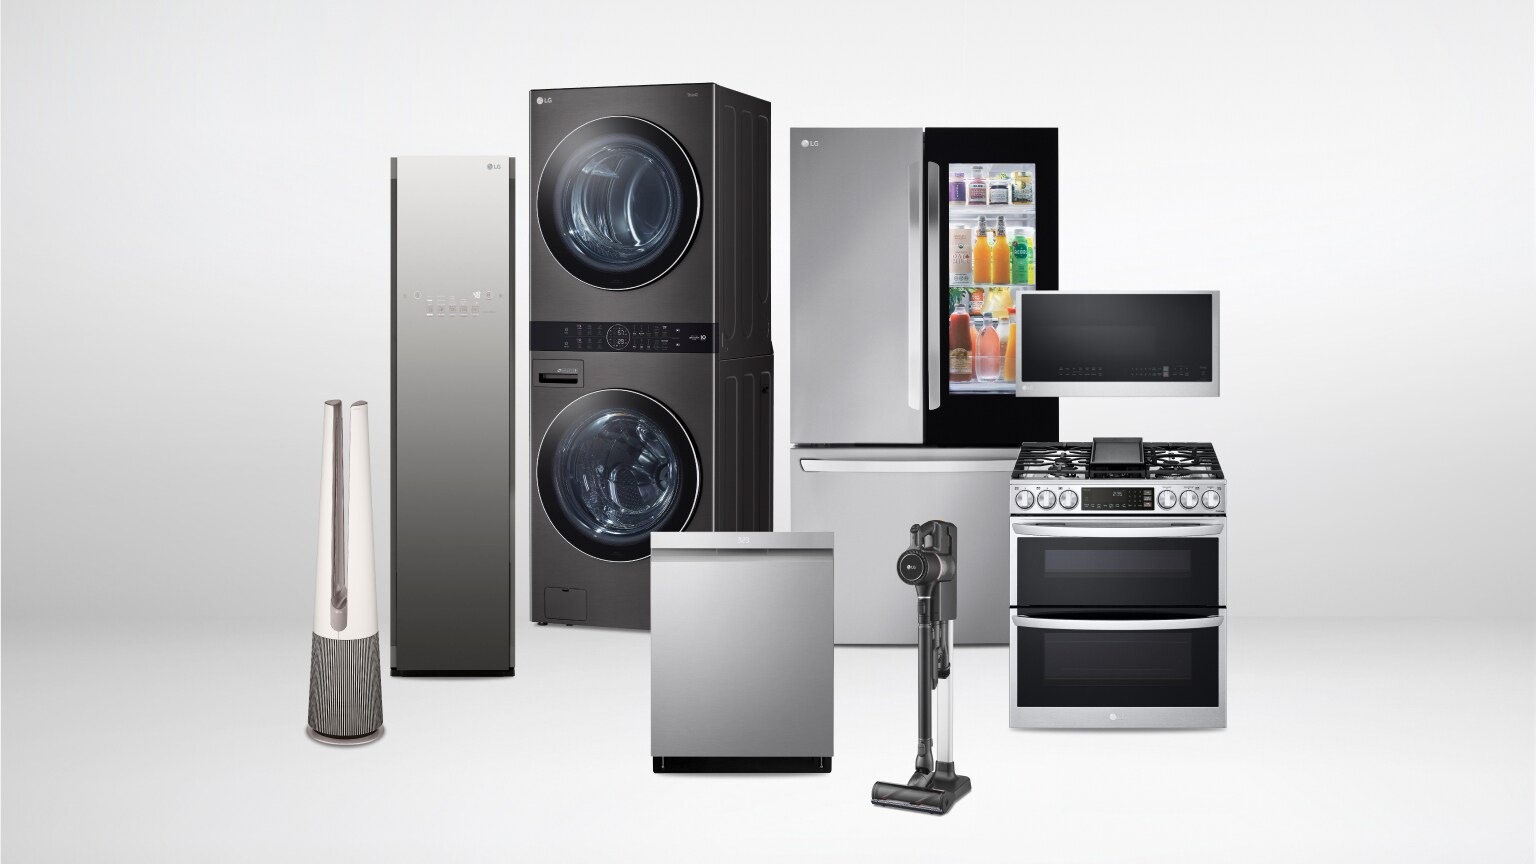 Up to 25% on best-selling appliances